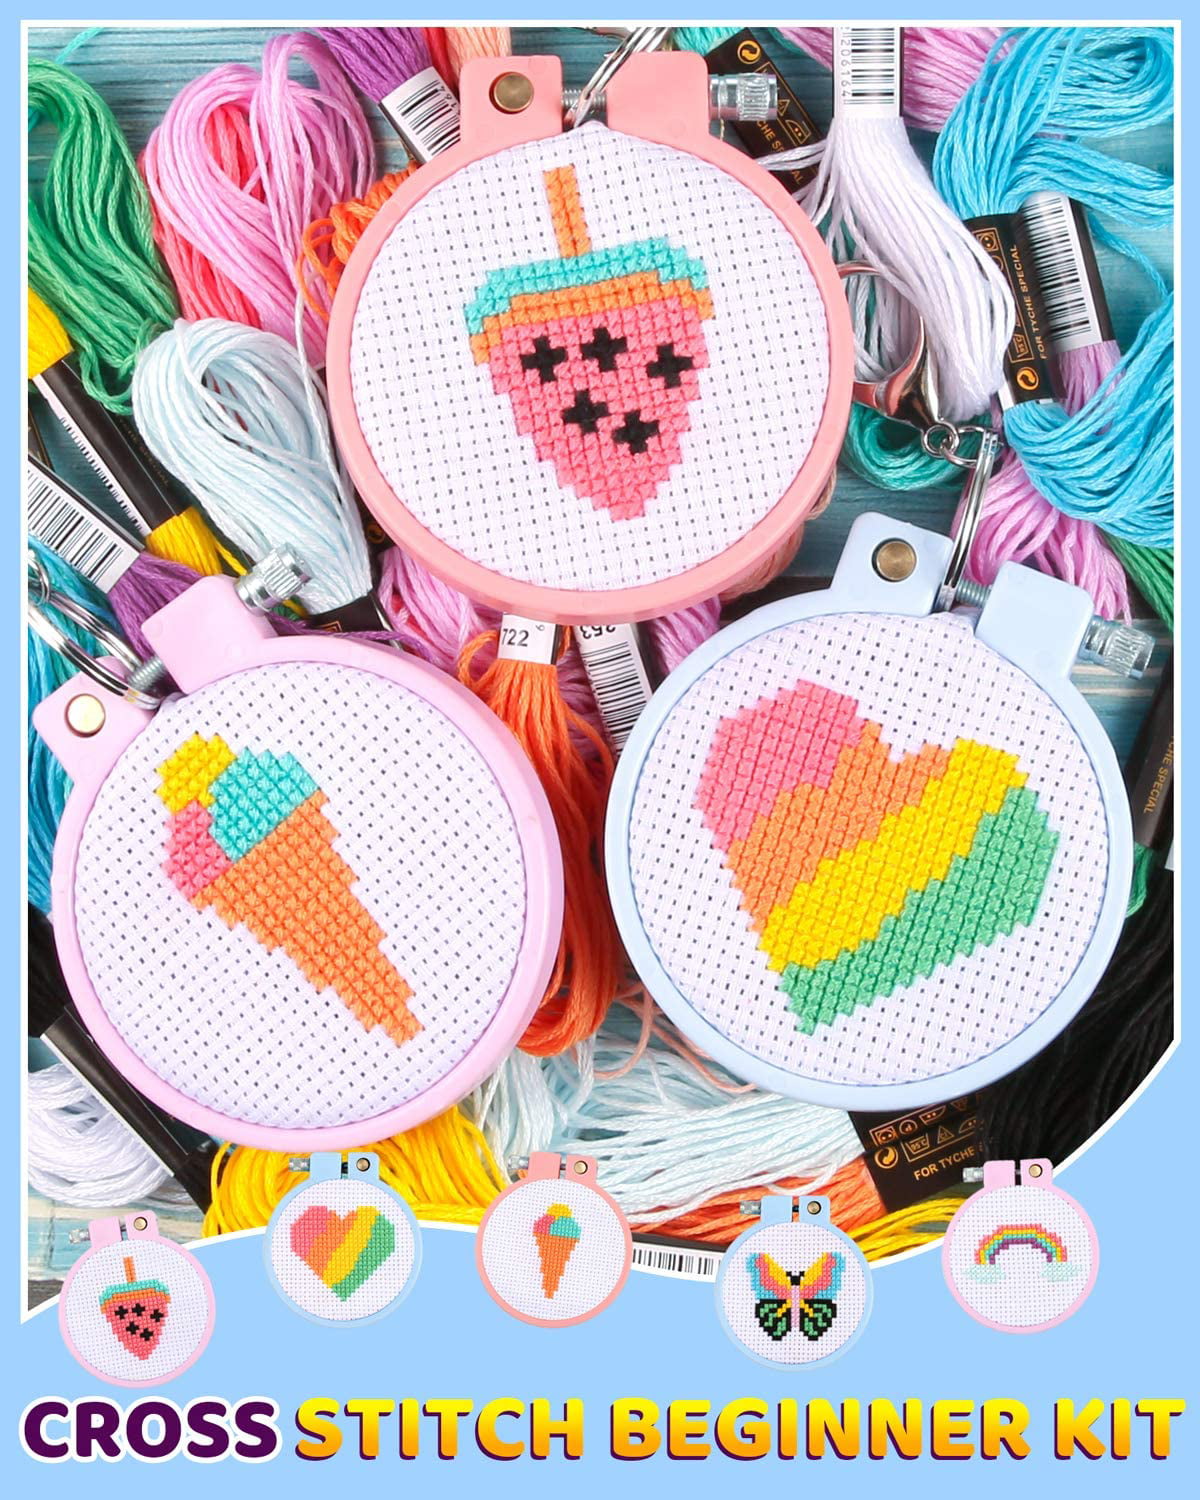  Pllieay Cross Stitch Beginner Kit for Kids 7-13, Includes 6pcs  Project Cross Stitch Pattern and 2pcs Hoops, 12 Skeins, Needle Point  Starter Kit Sewing Set with Instructions